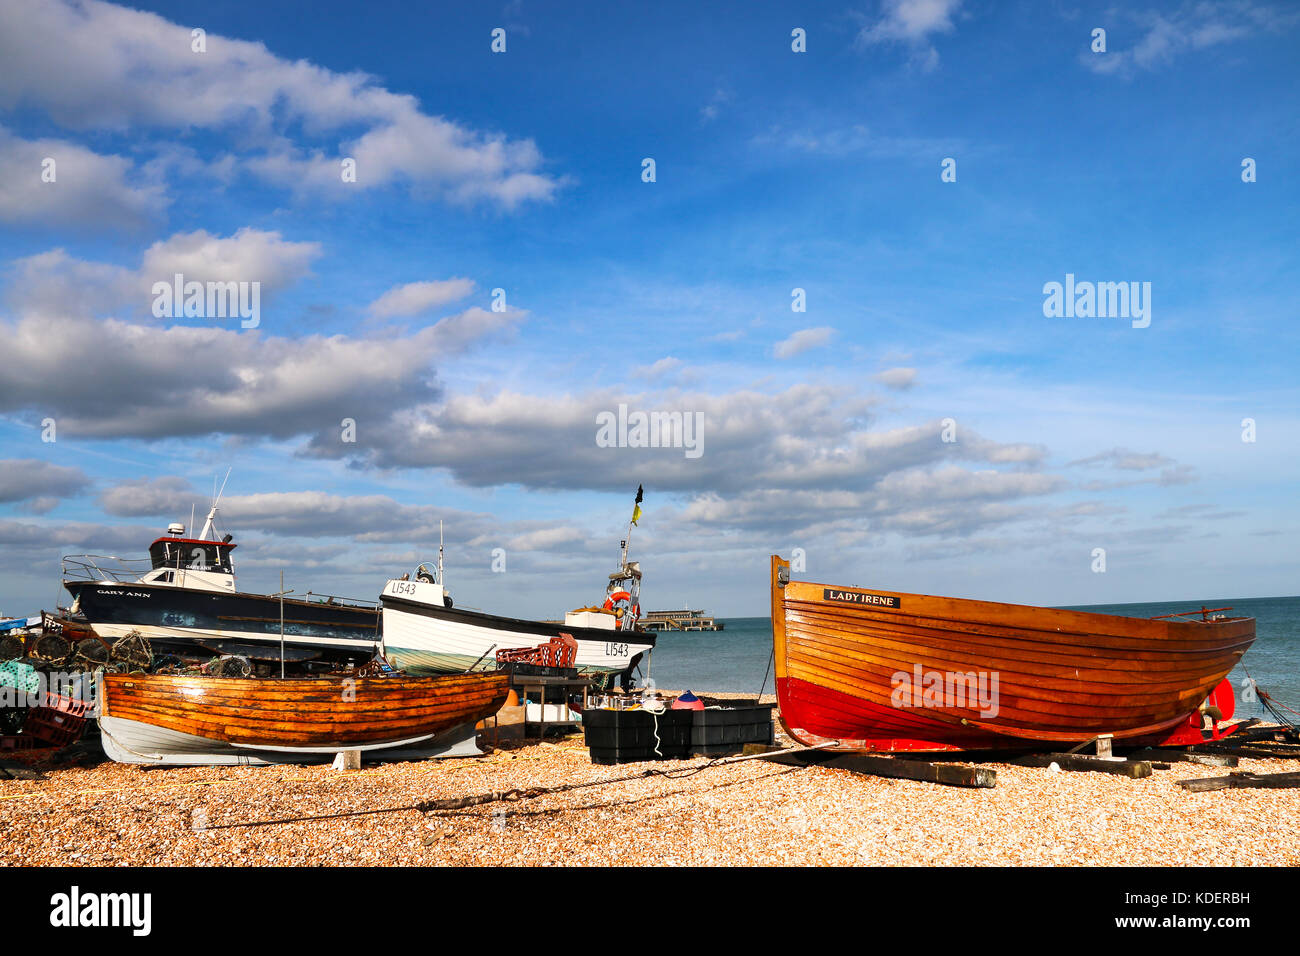 A sunny Deal October Day Stock Photo